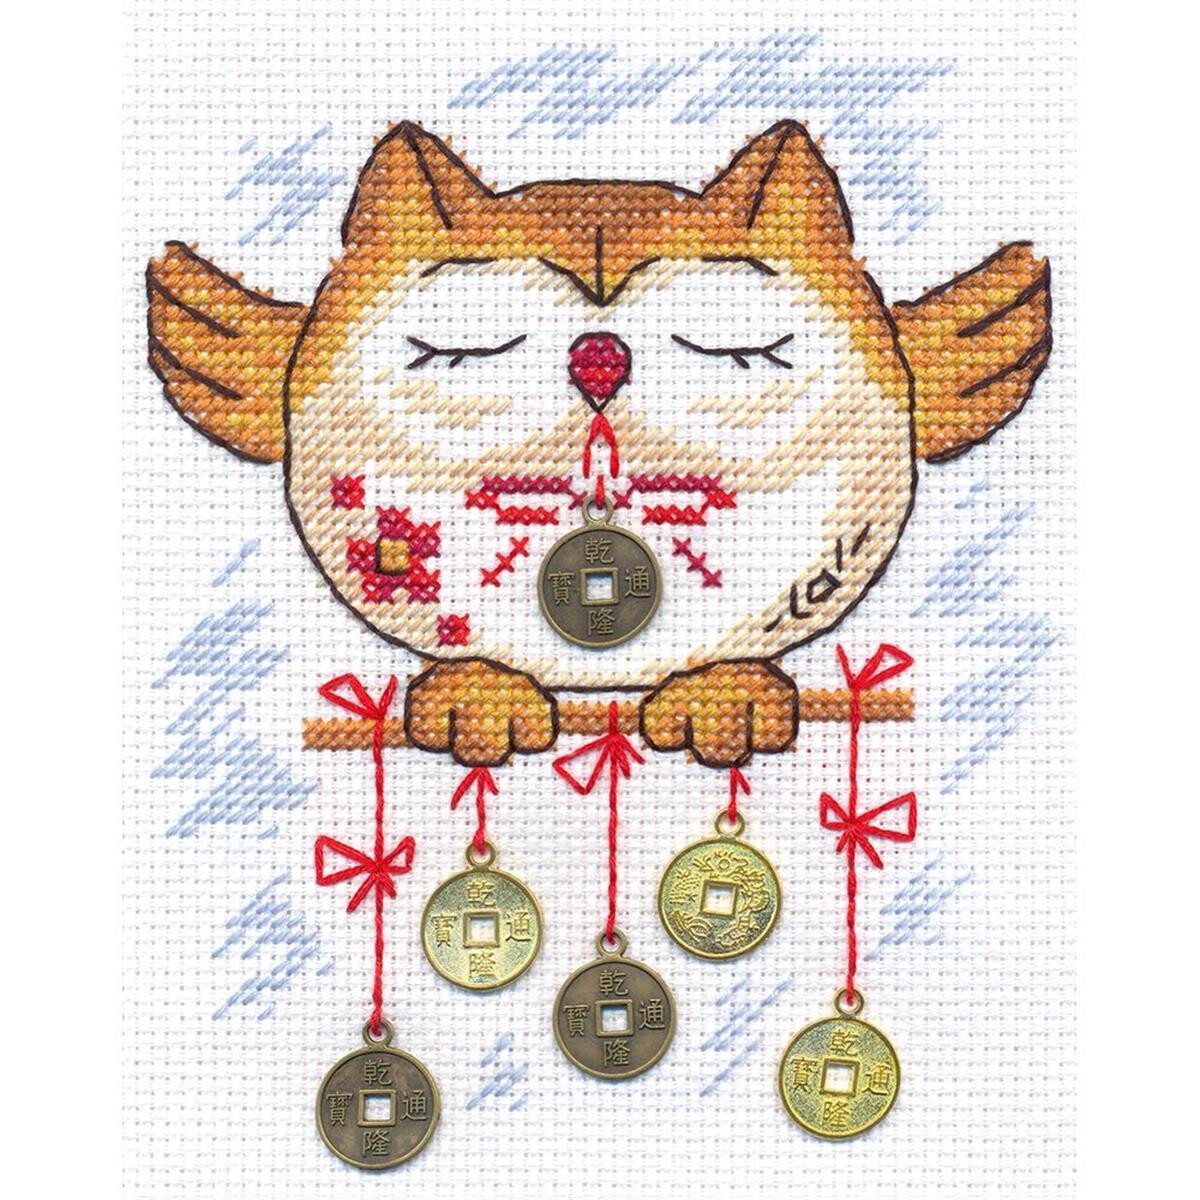 Panna counted cross stitch kit "Profit in...